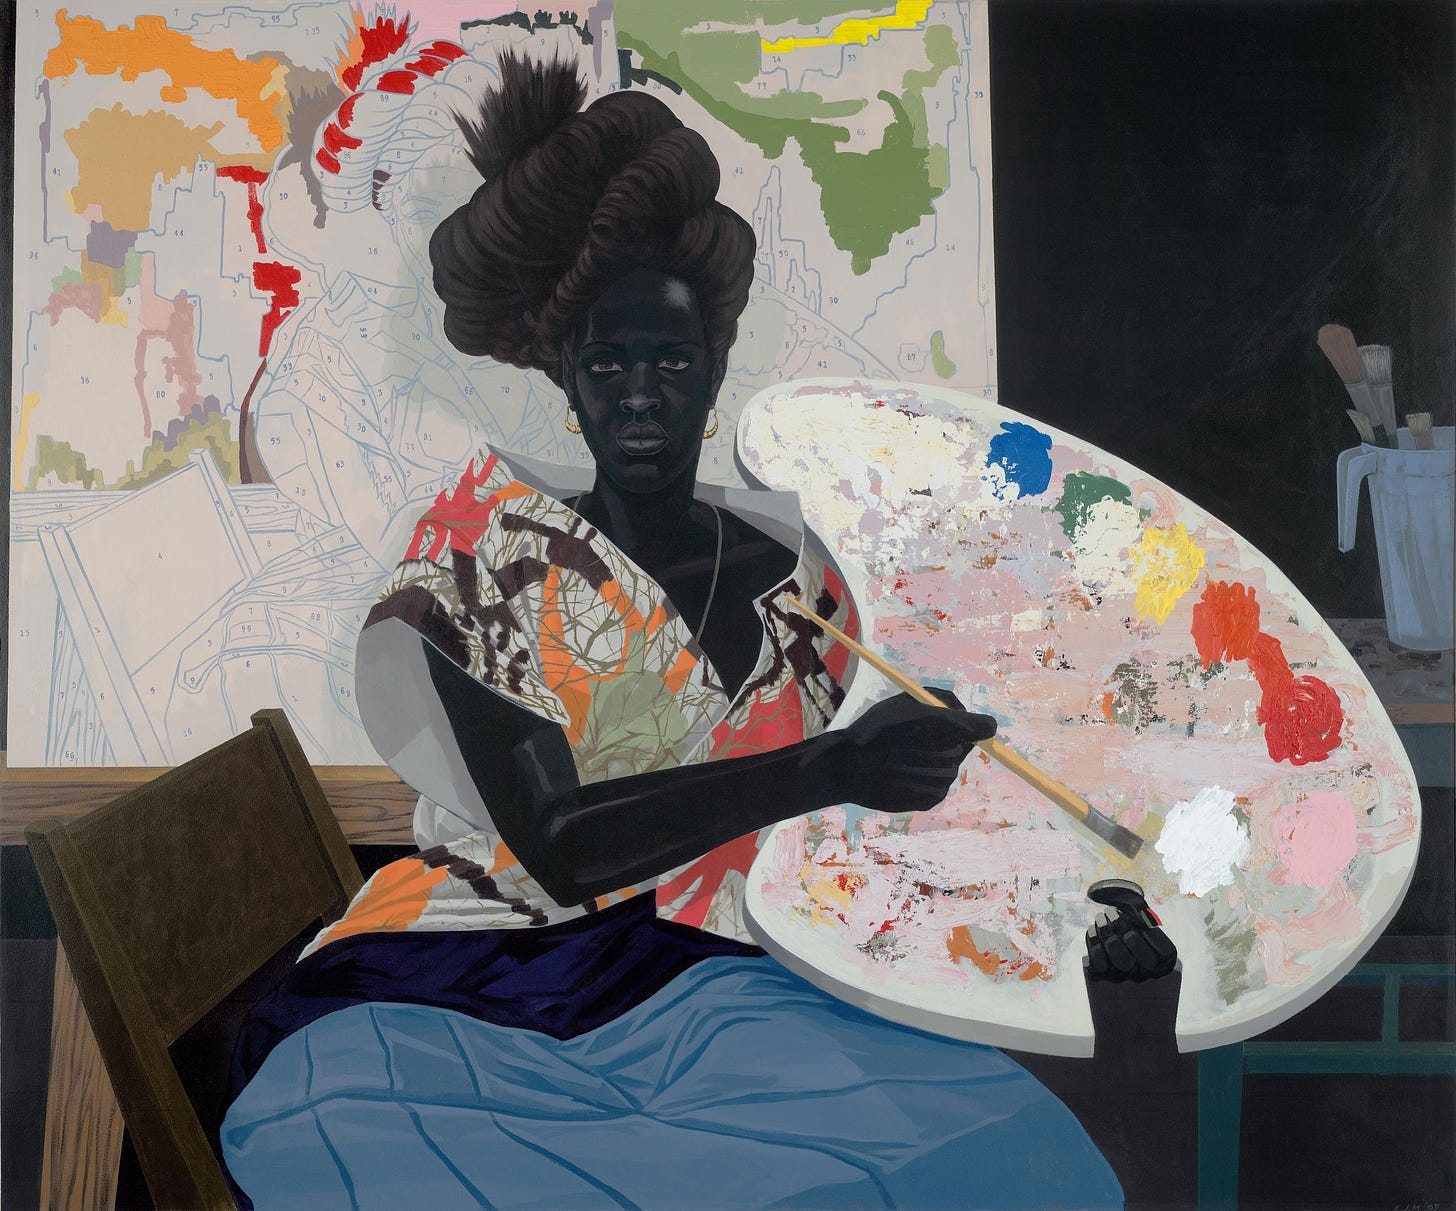 “Untitled”  by Kerry James Marshall.